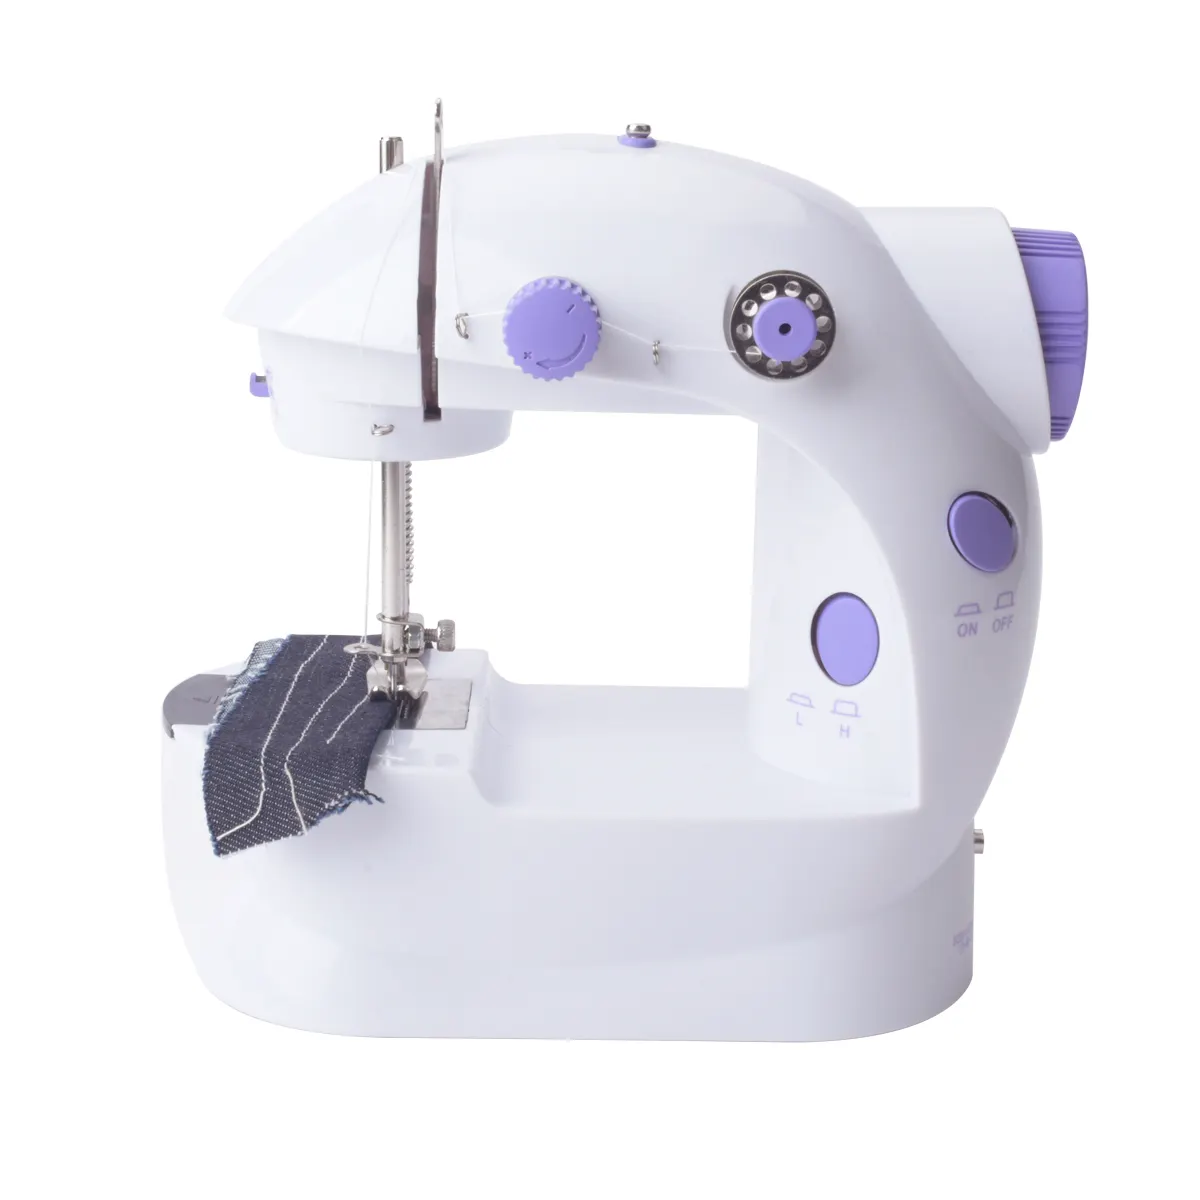 SM-201 mini sewing machine with extension table mini size handheld convenient multifunction electric